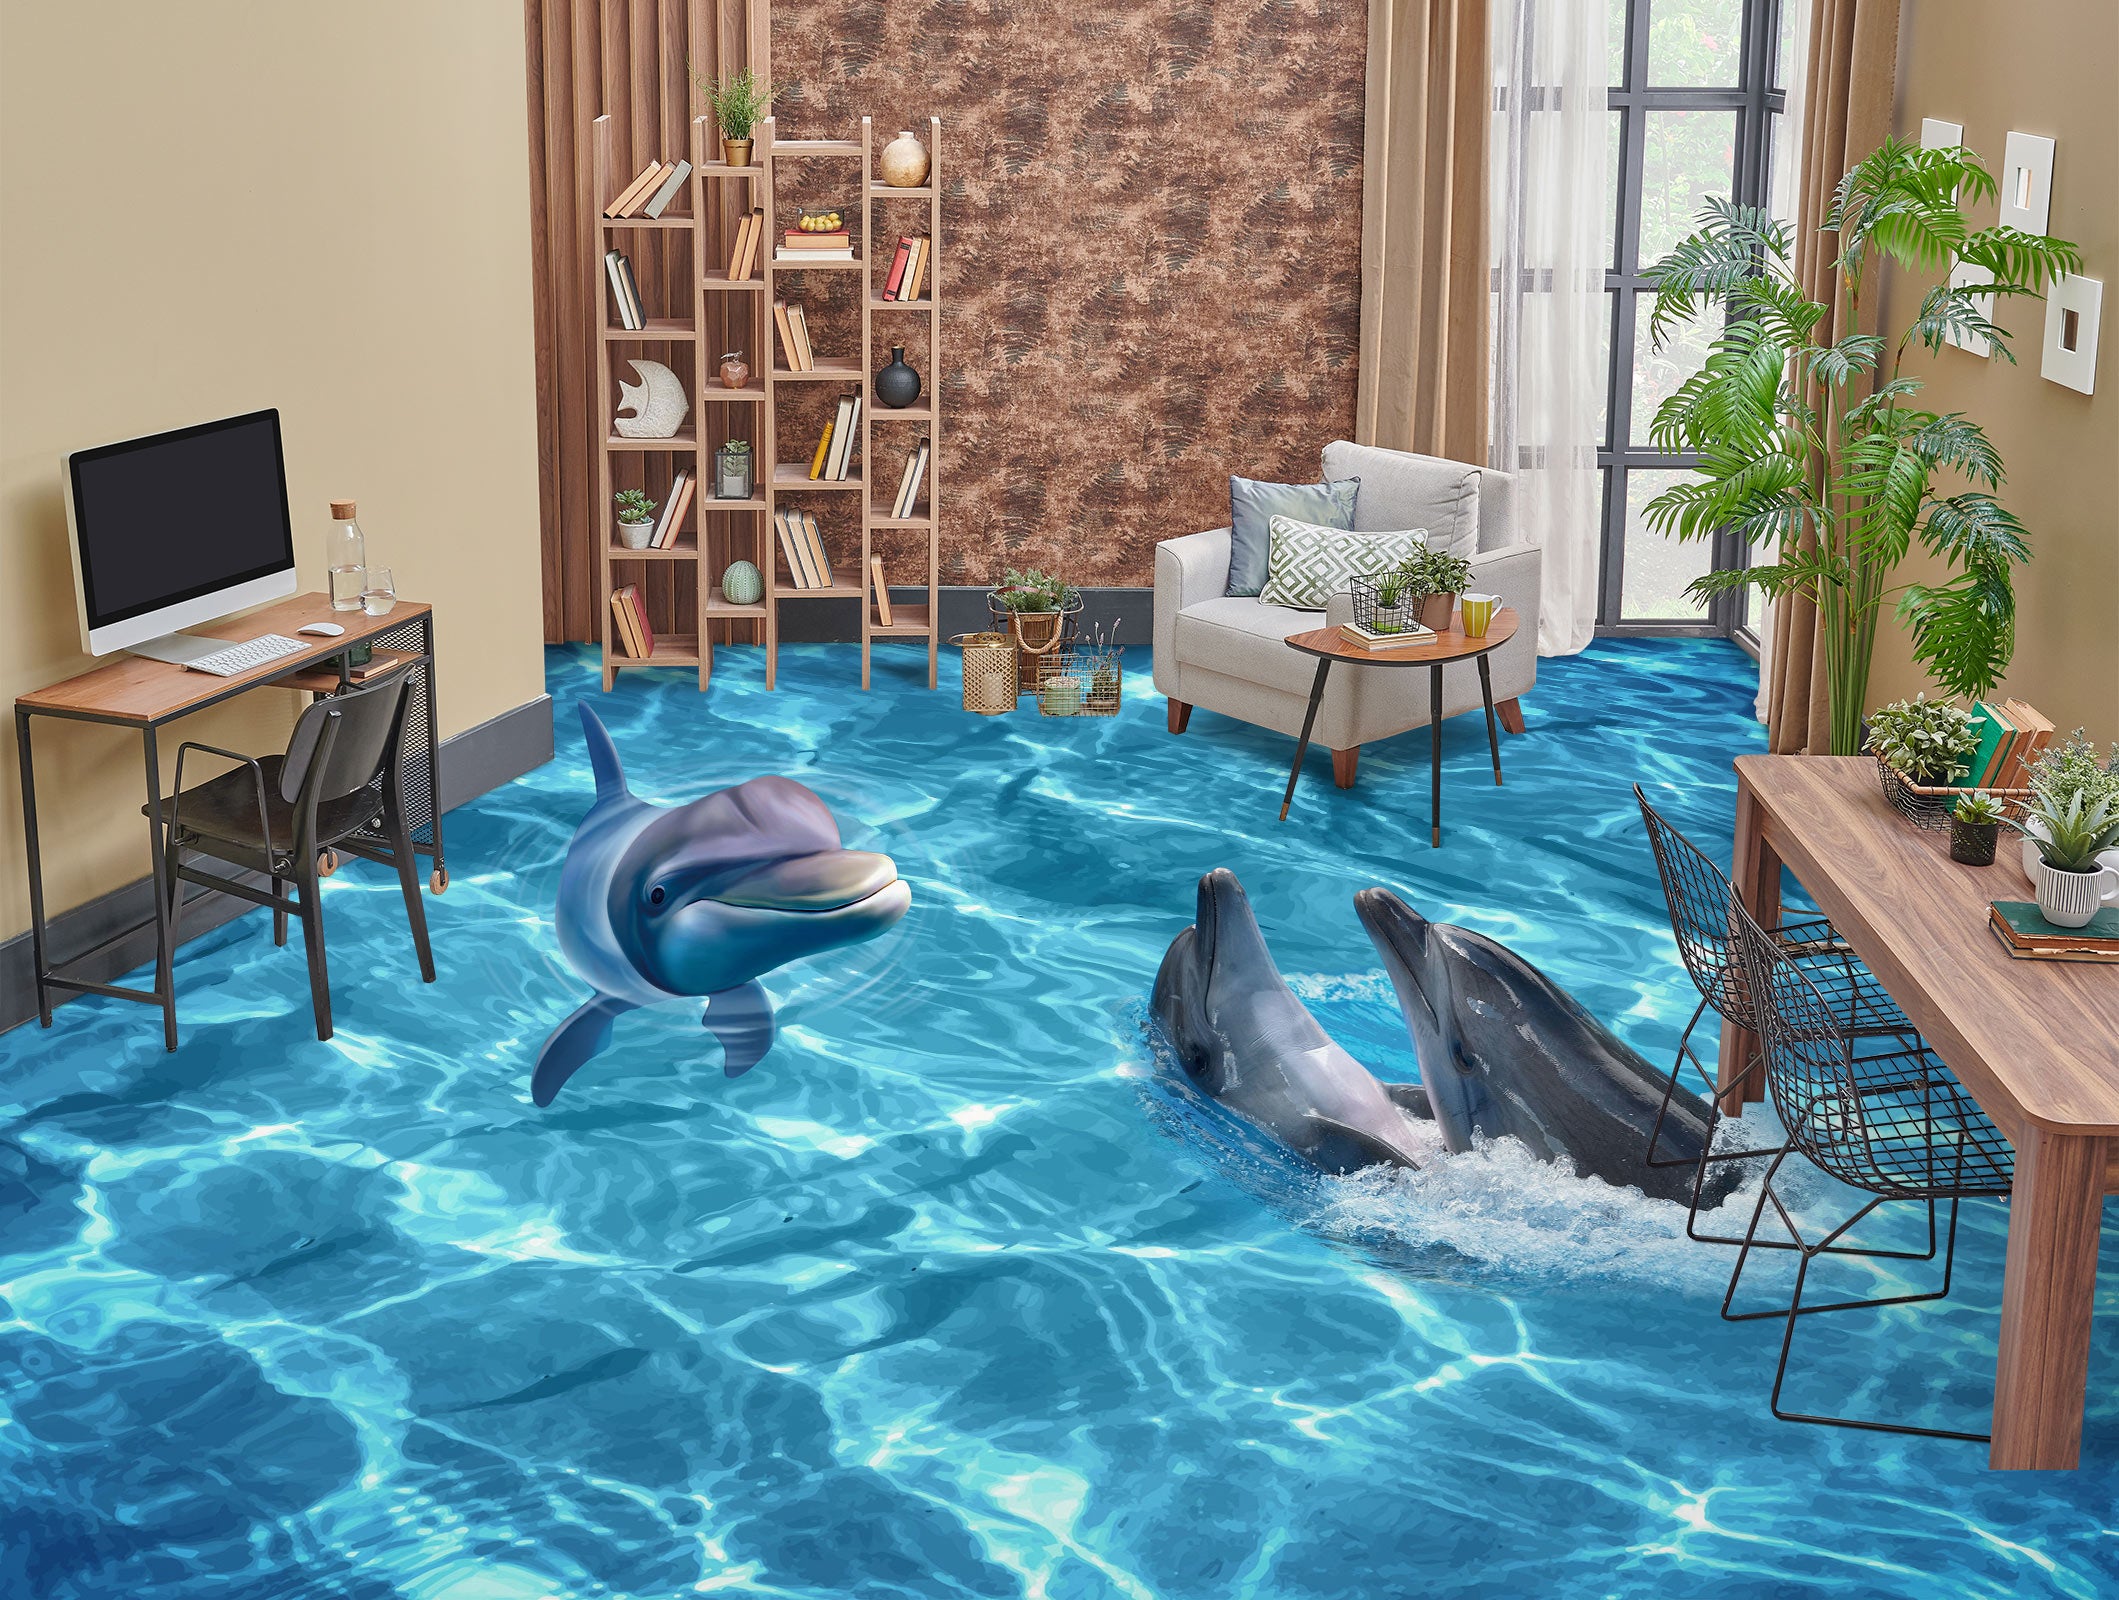 3D Encounter Of Dolphins 1333 Floor Mural  Wallpaper Murals Self-Adhesive Removable Print Epoxy